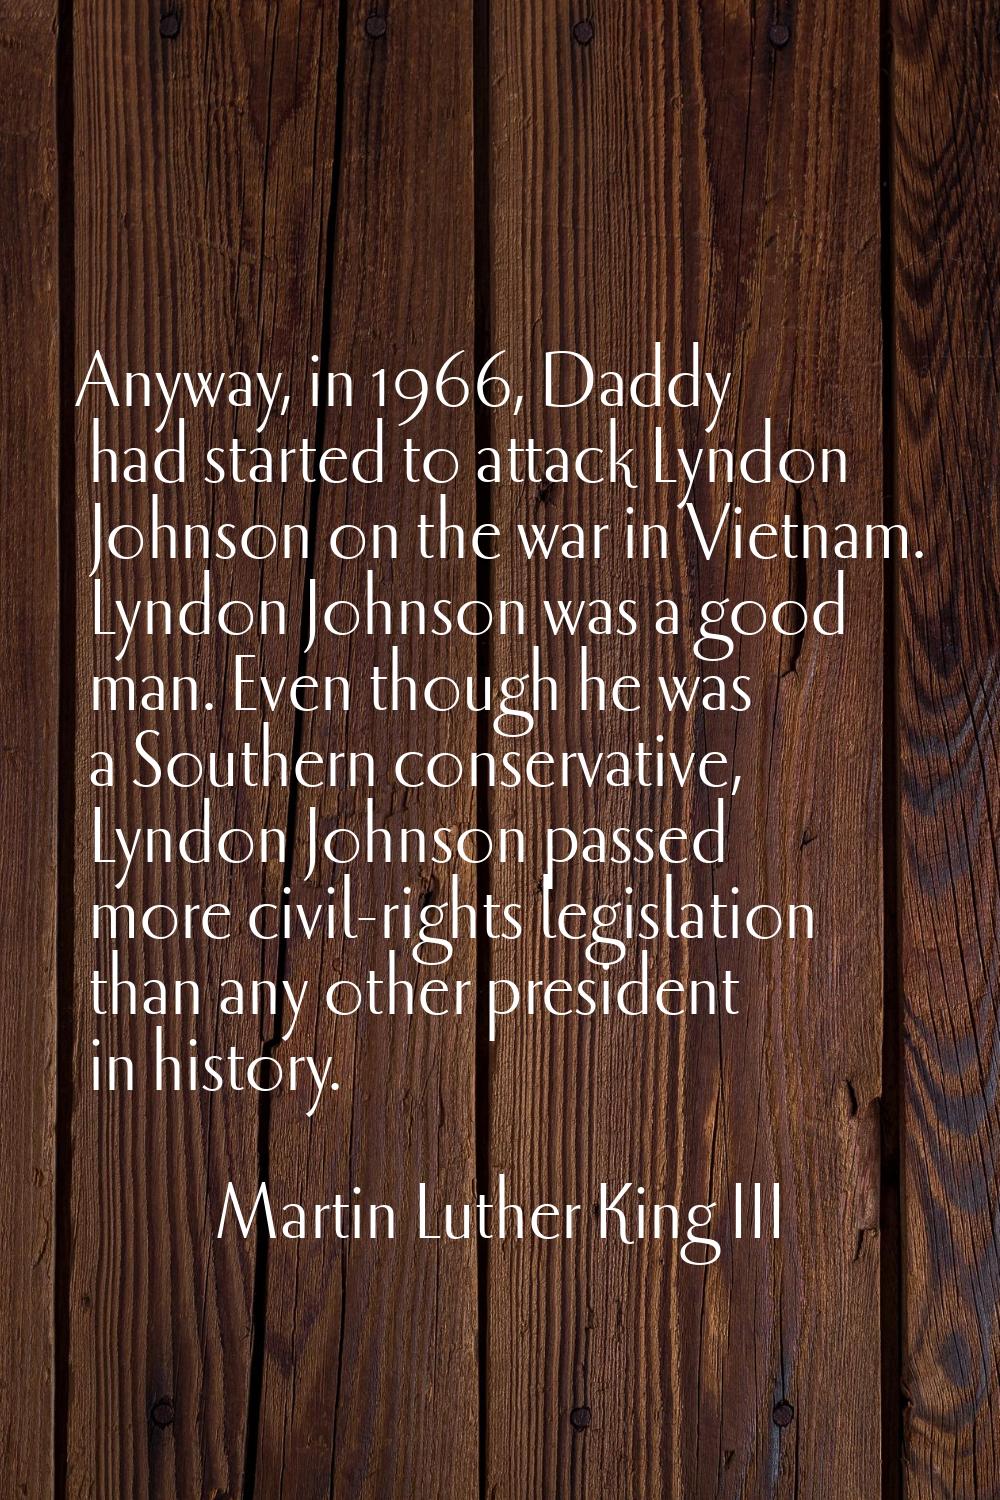 Anyway, in 1966, Daddy had started to attack Lyndon Johnson on the war in Vietnam. Lyndon Johnson w